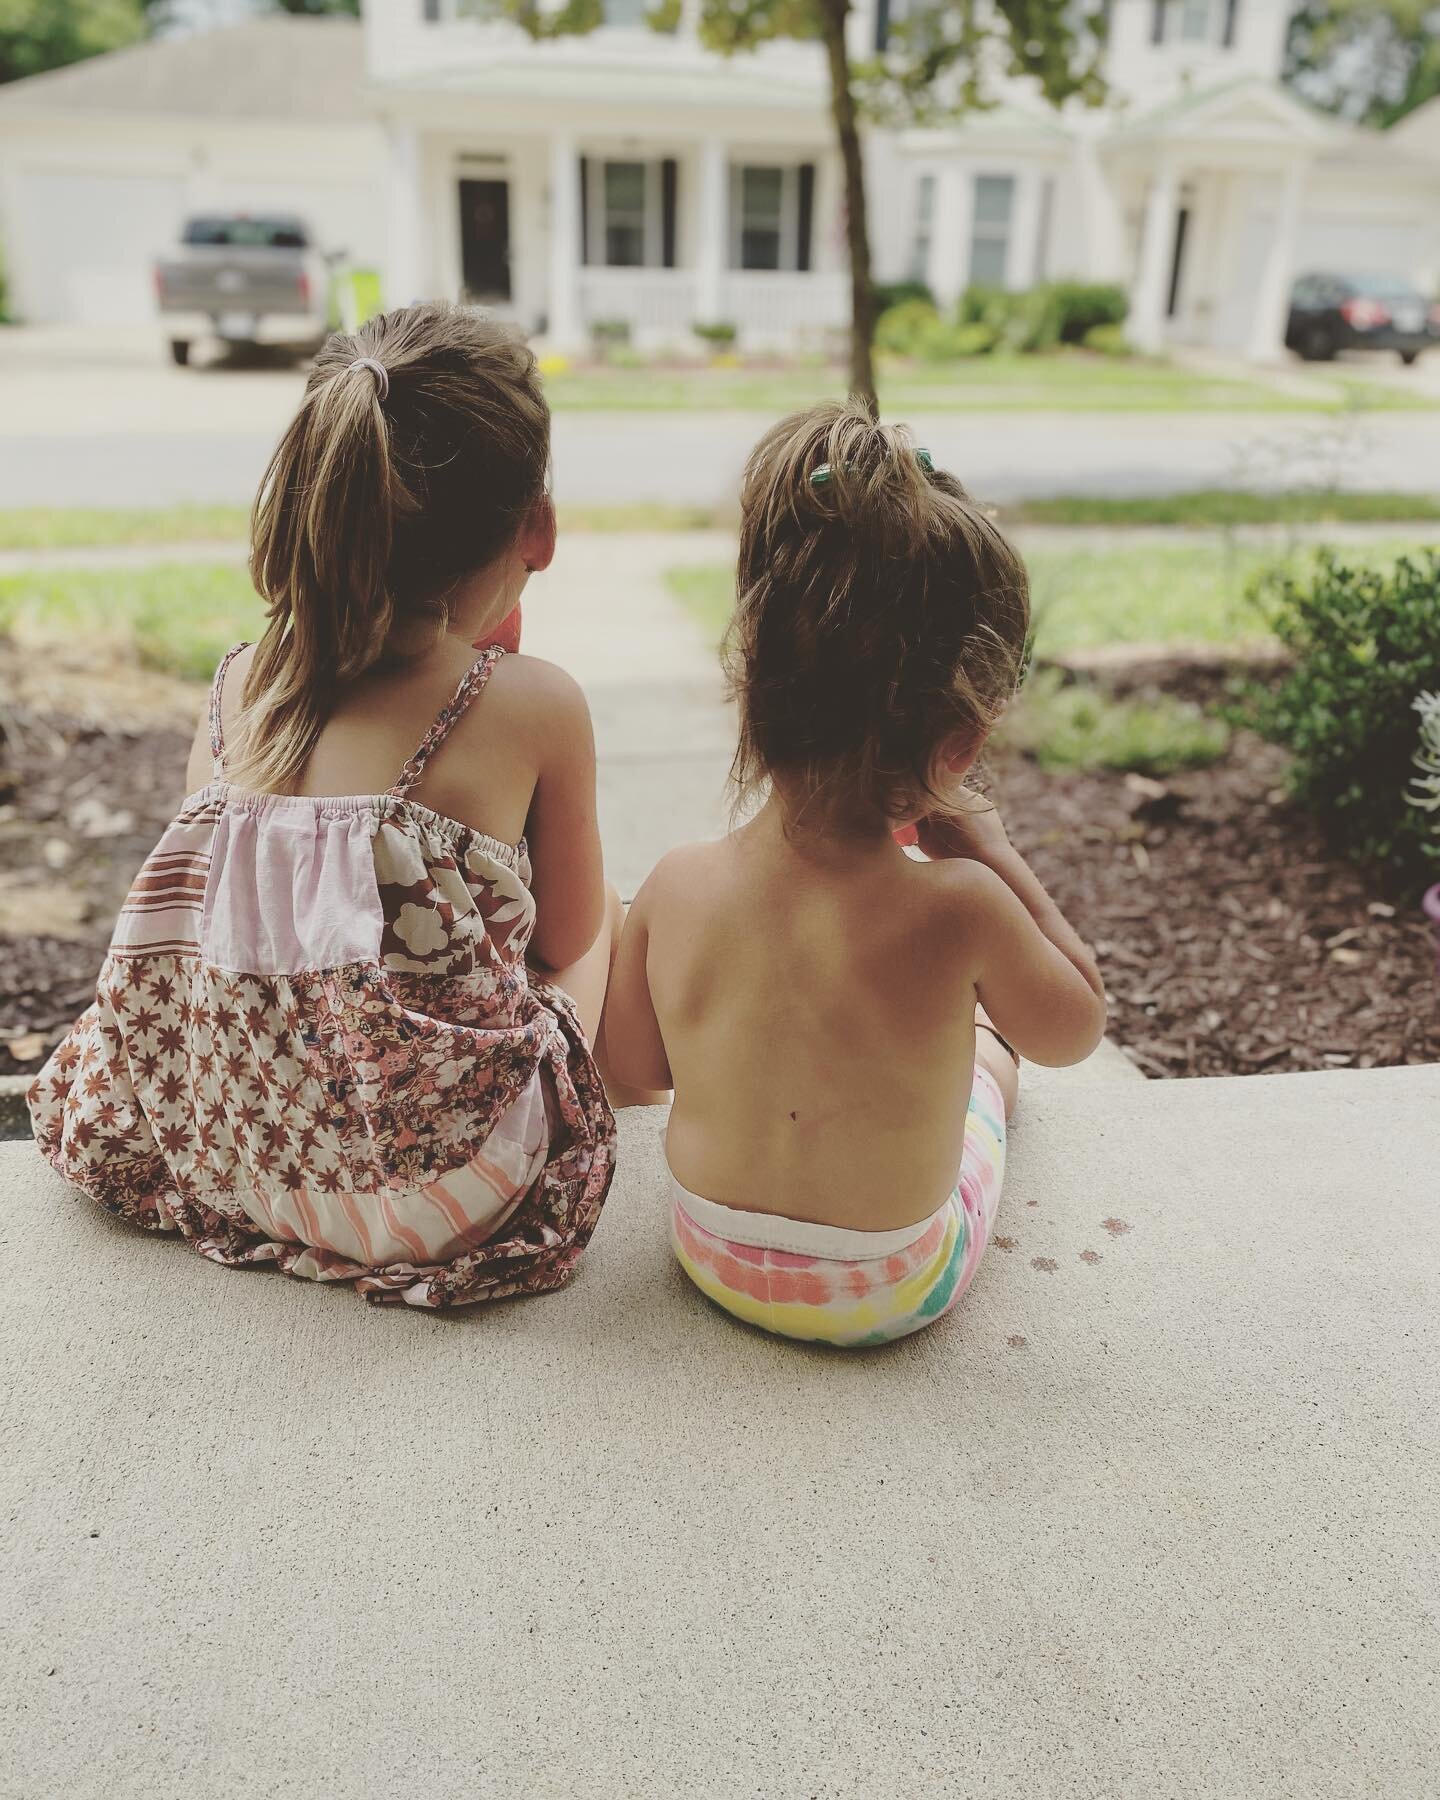 May you grow up loving simplicity. 

Because the world over-complicates everything, and the true, soul-transforming treasure that defines a full and purpose-filled life is found in the simple all around. 

Sitting on the front stoop with sissy in the